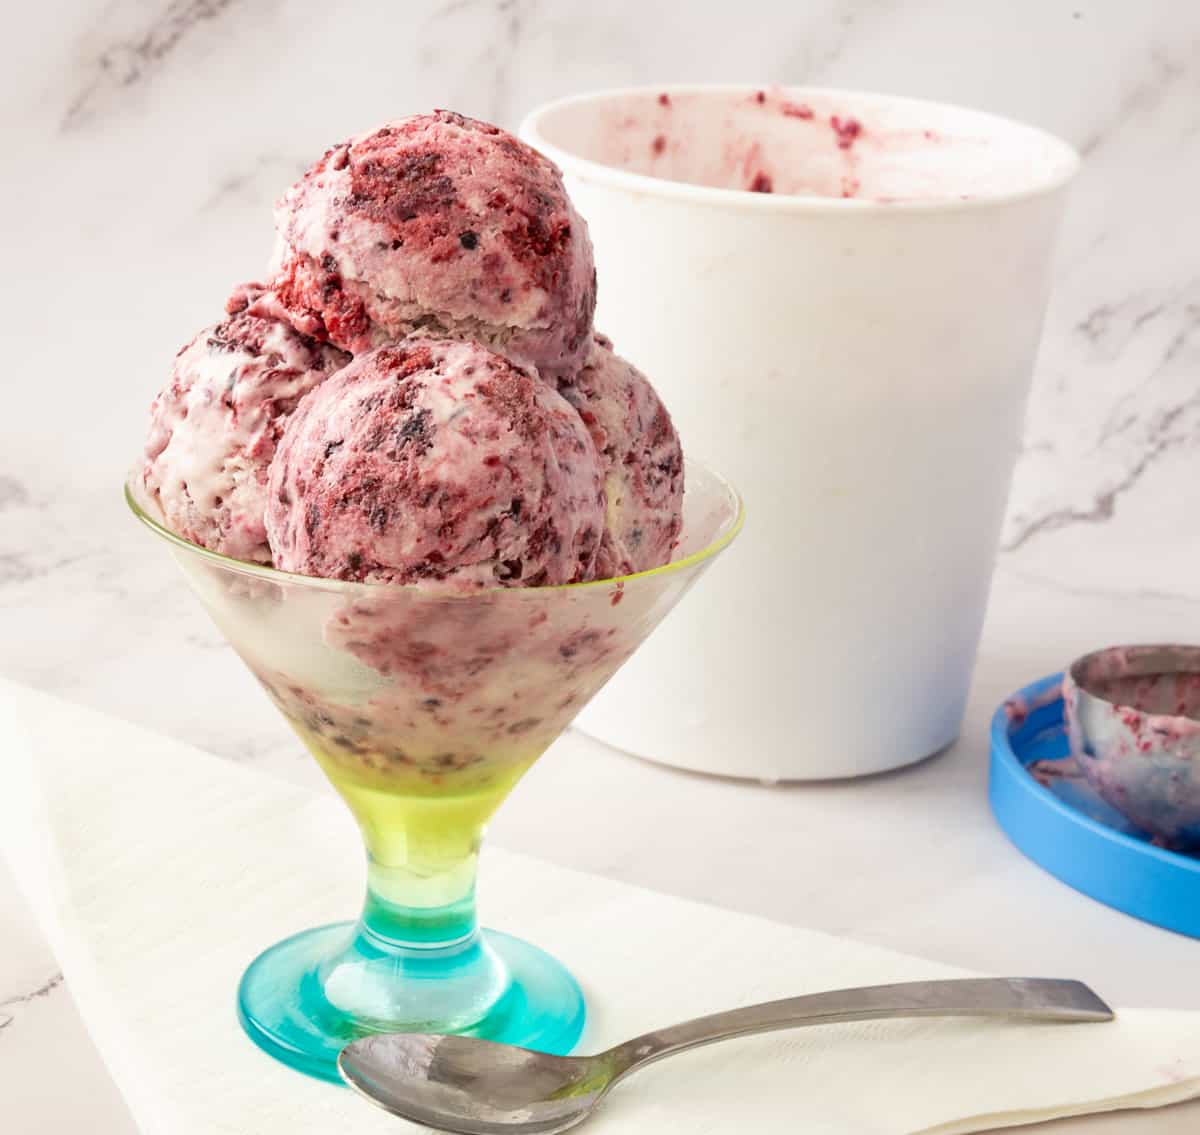 scoops of no churn blackberries ice cream in a bowl.